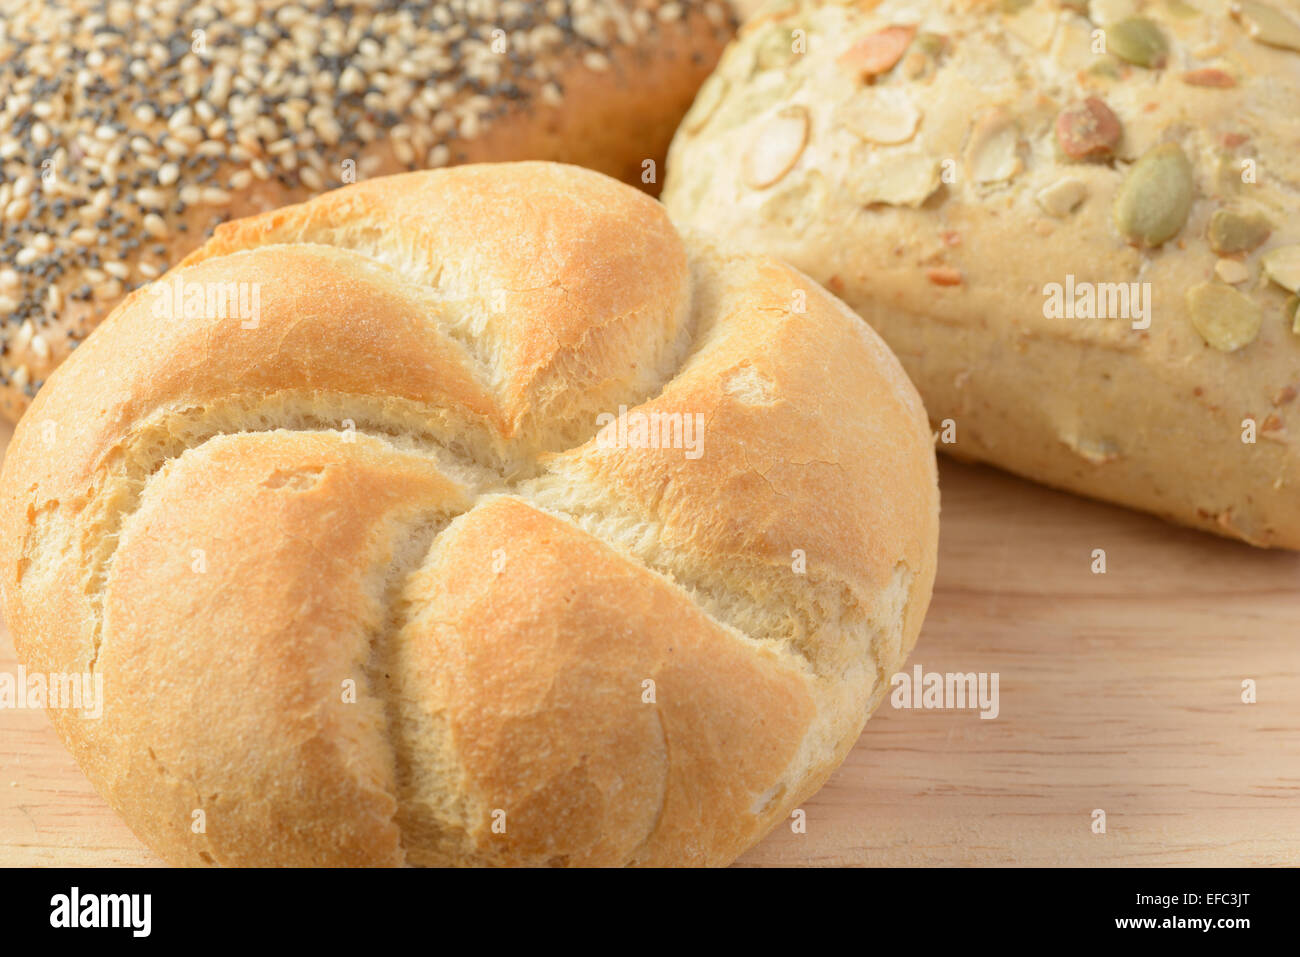 Stock image of bread rolls fresh from the bakers Stock Photo